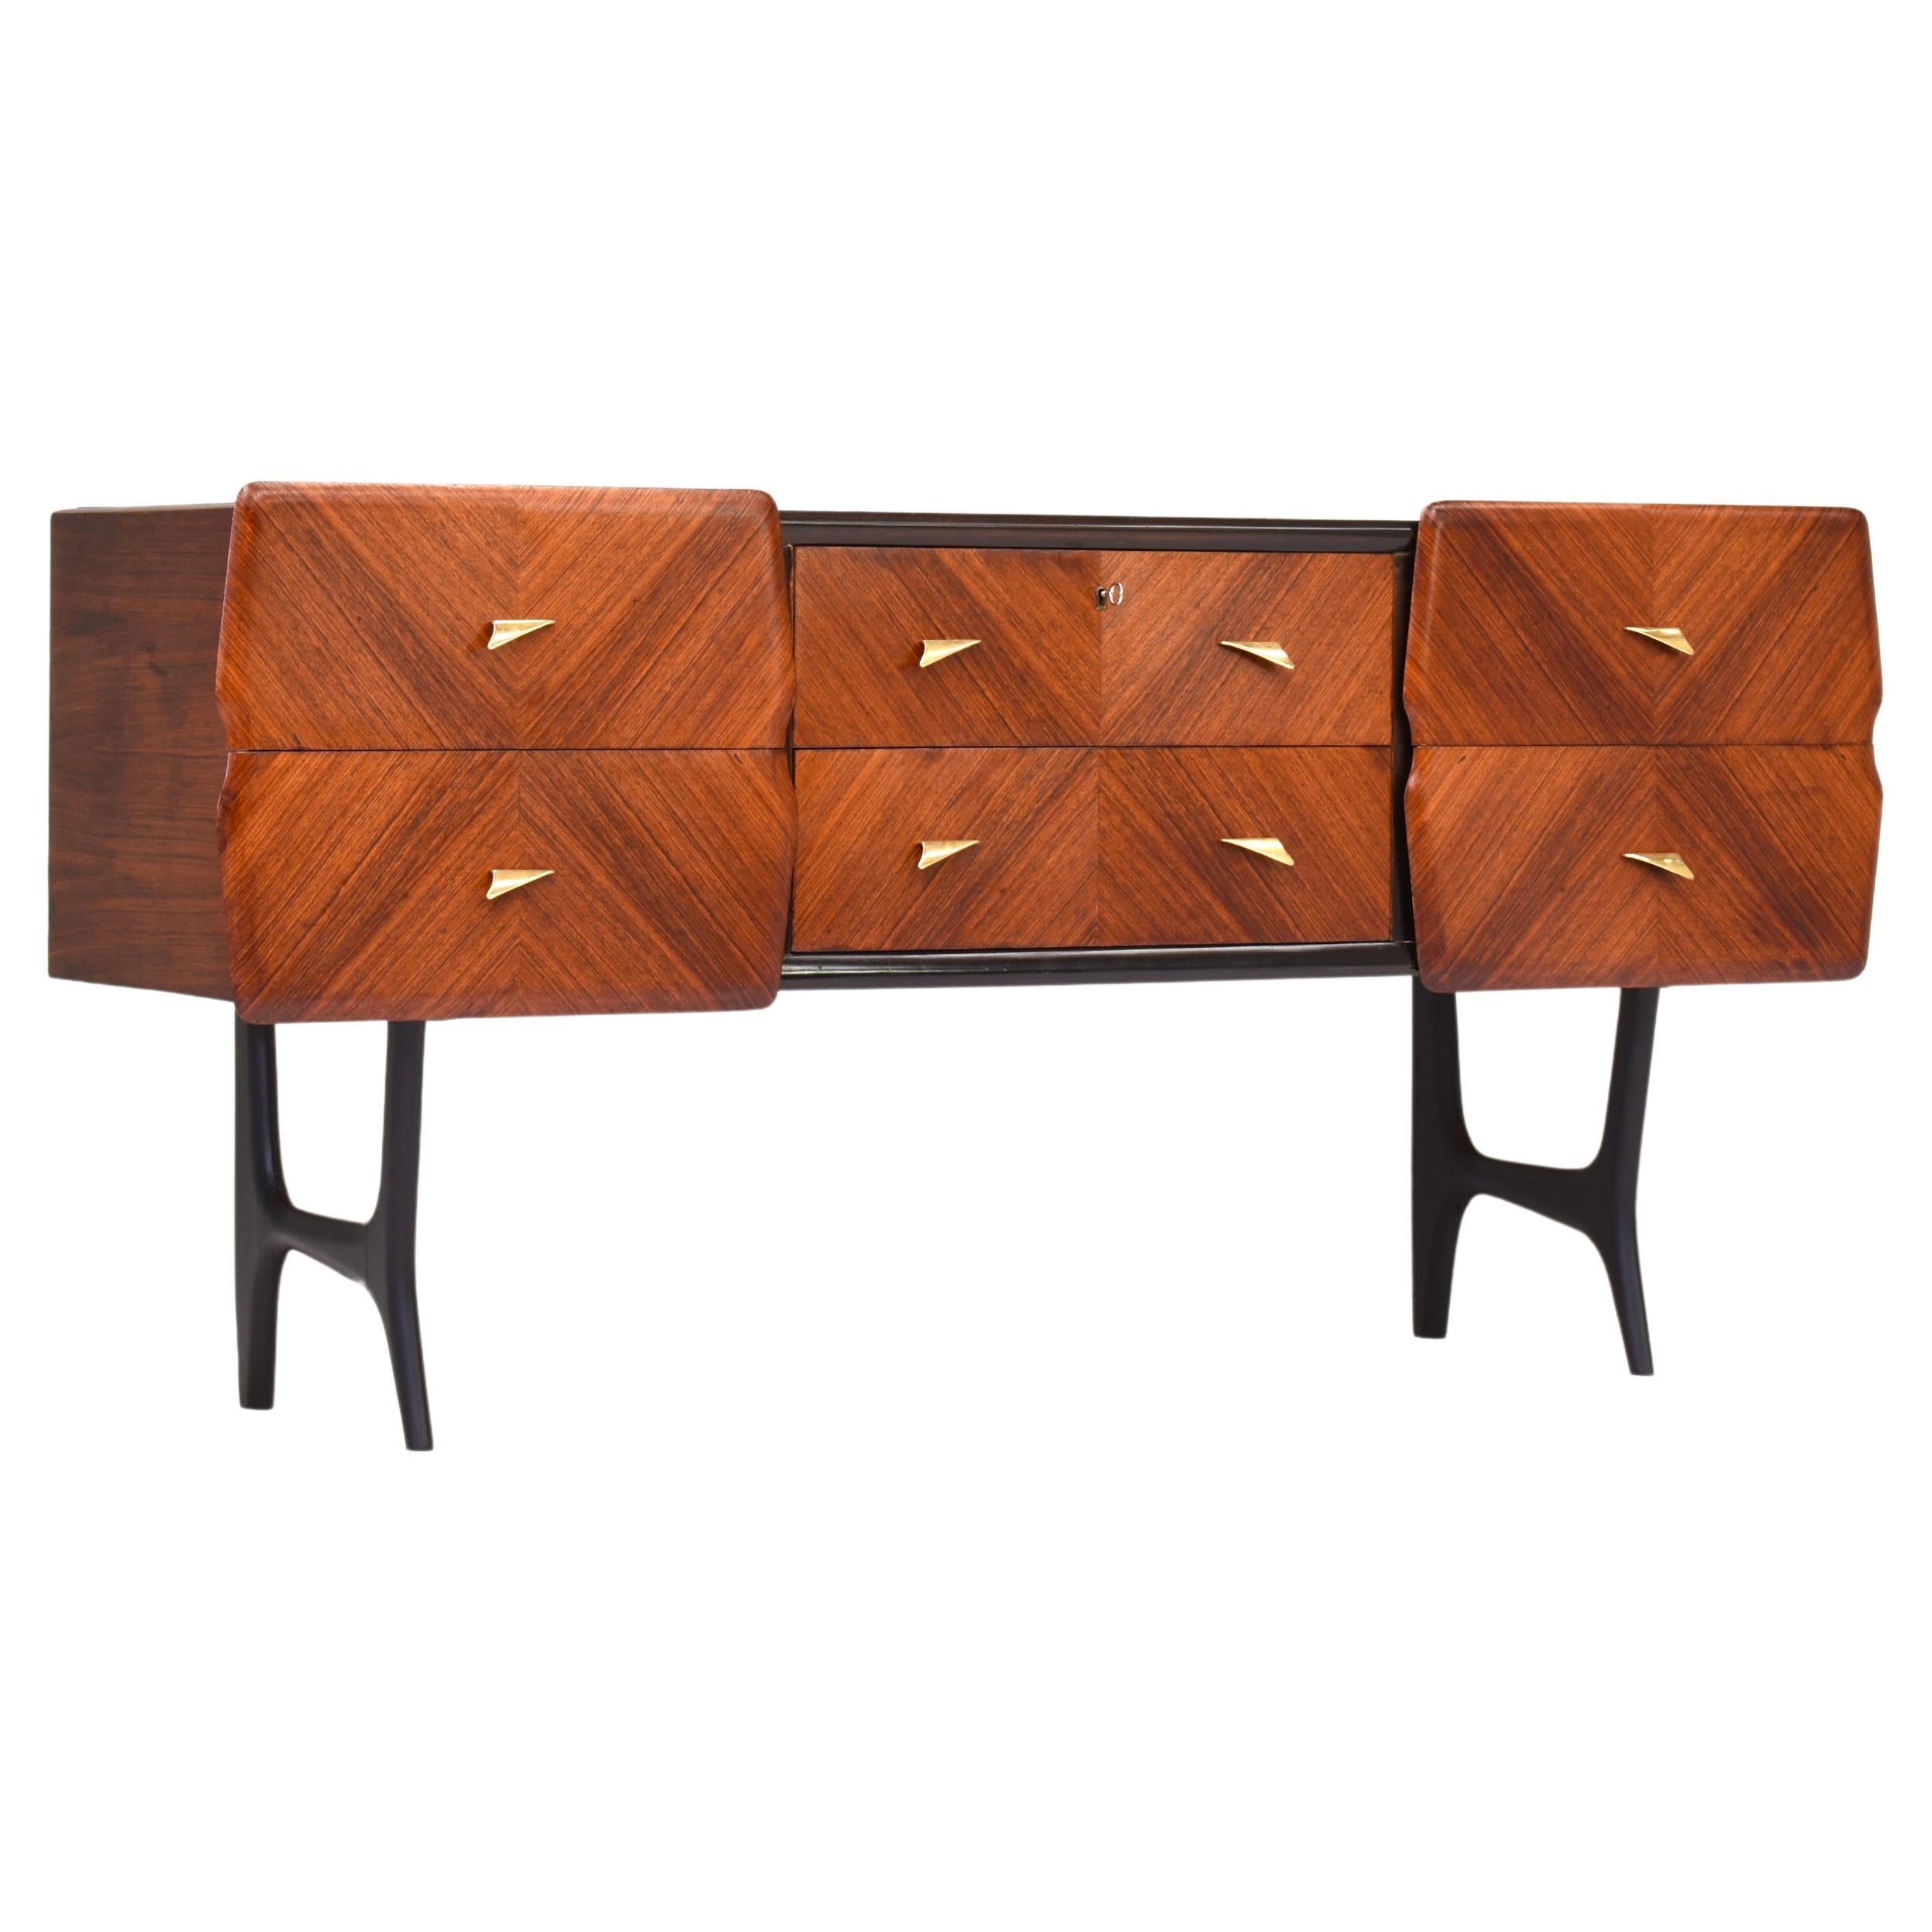 Italian Sideboard in Walnut with Brass details and Glass top, Italy, circa 1950